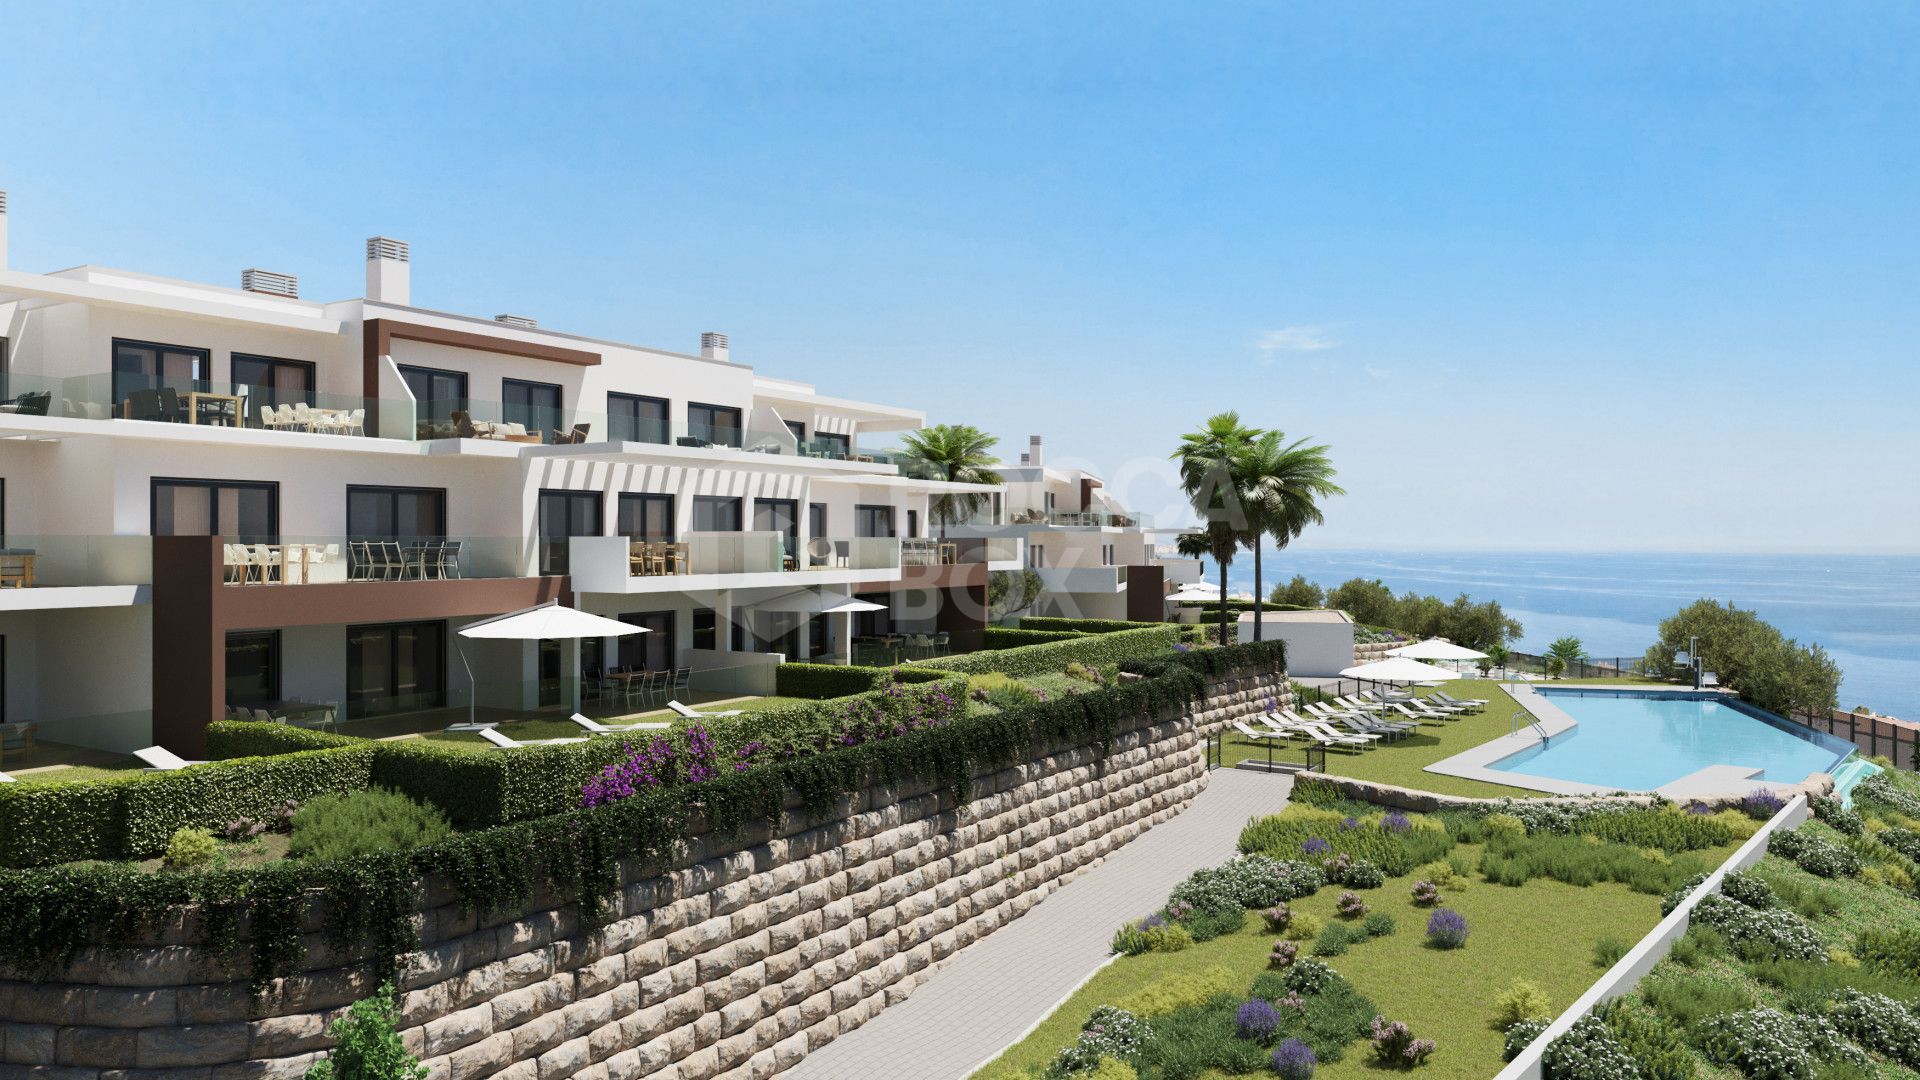 Luxury Living with Breathtaking Views: 3 Bedroom Apartment near the Beach